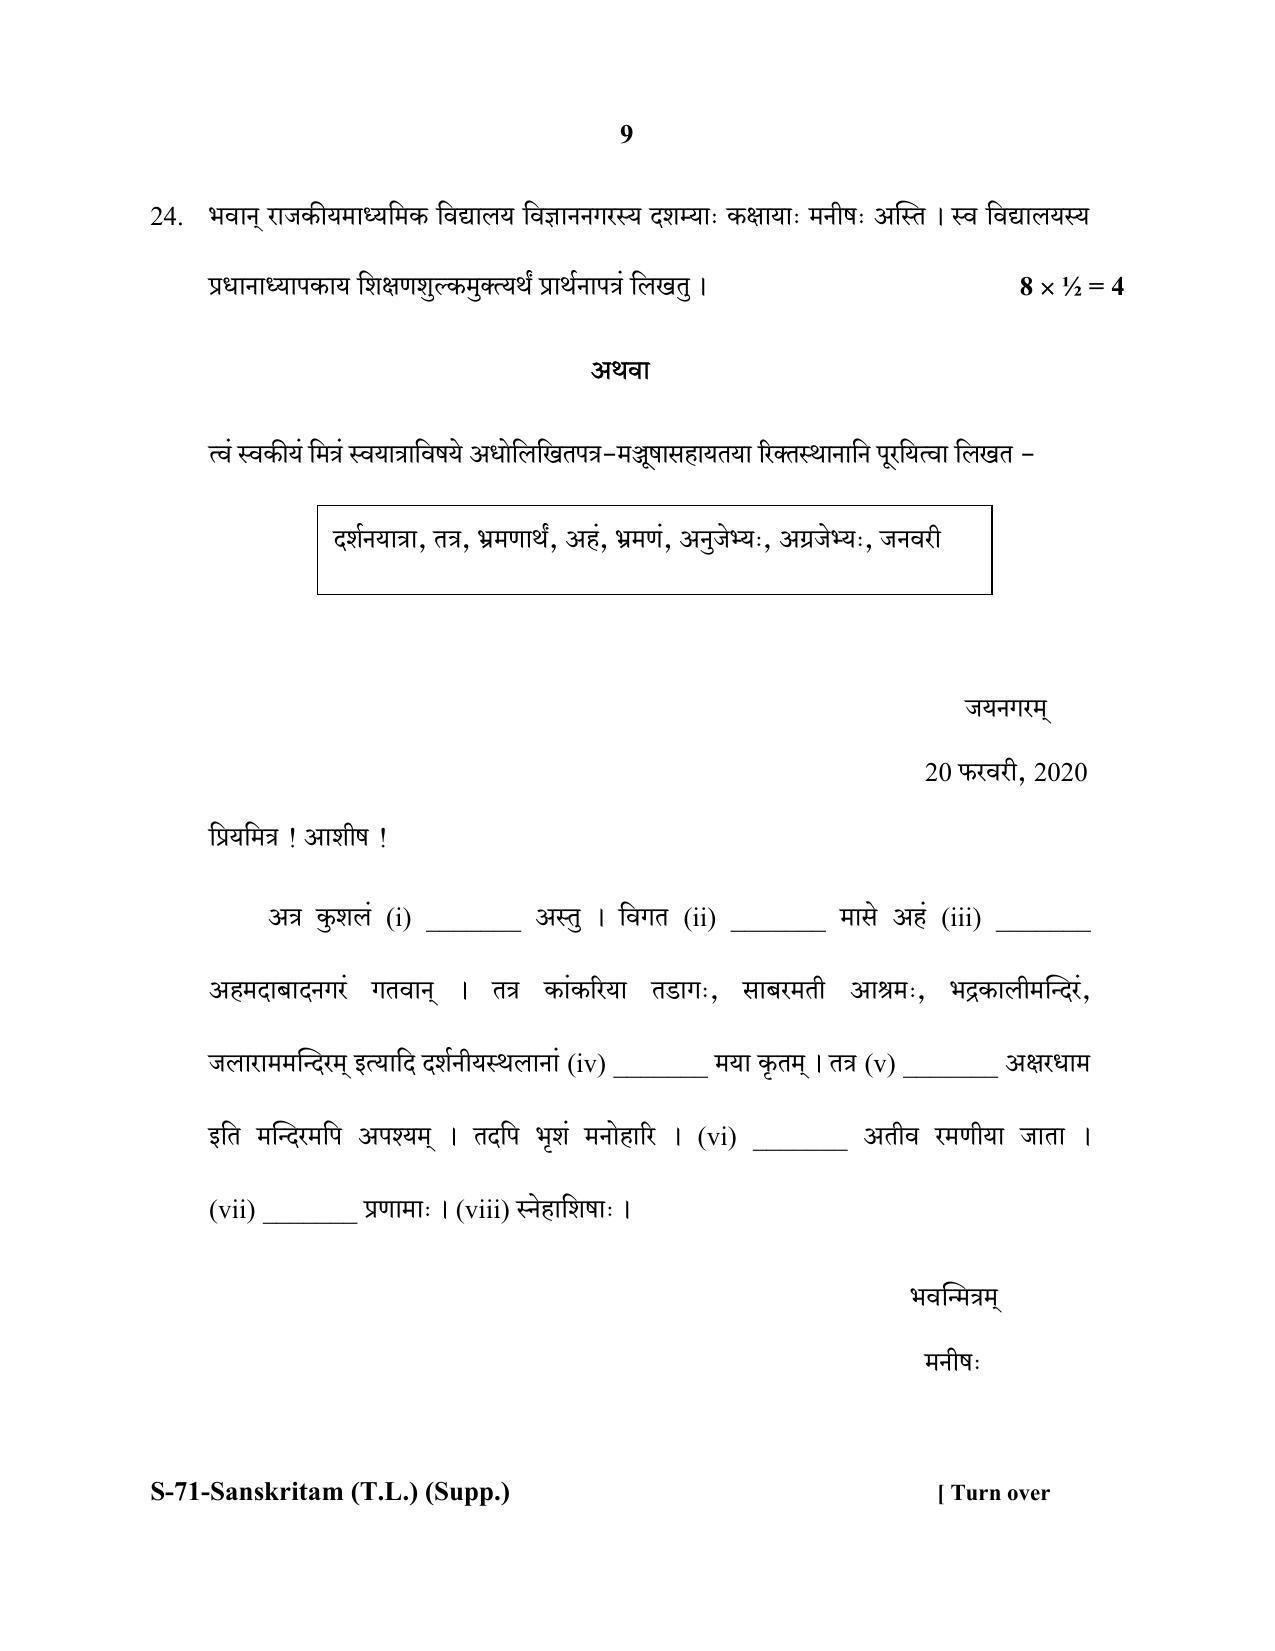 RBSE Class 10 Sanskrit TL Supplementary 2020 Question Paper - Page 9